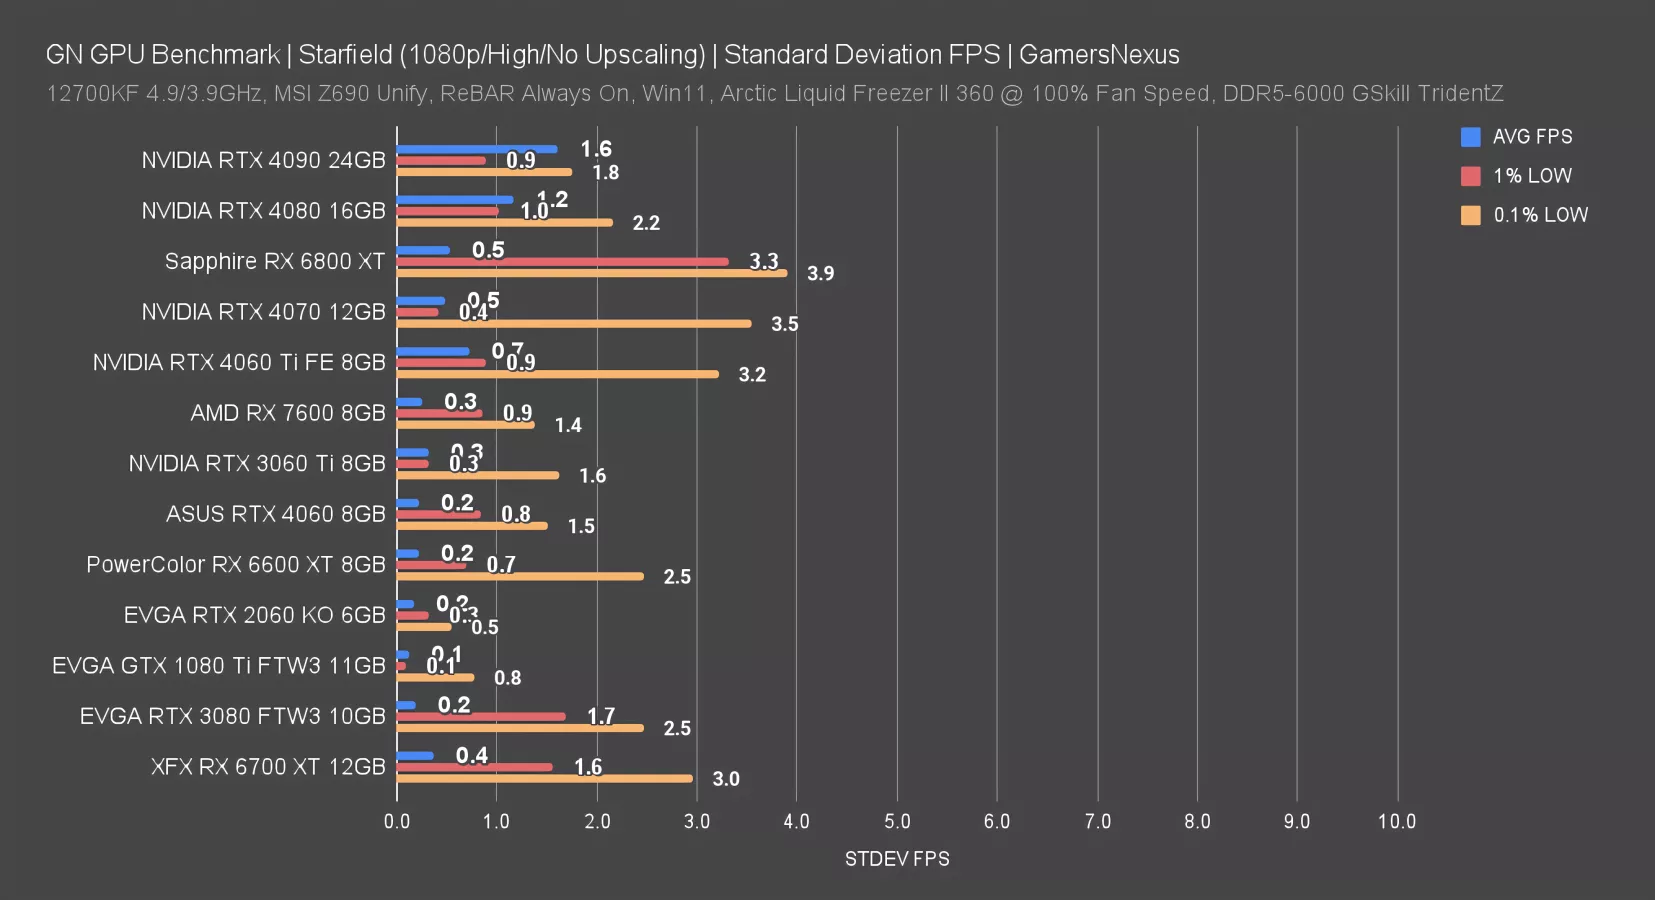 Best Cyberpunk 2077 graphics settings for Nvidia GTX 1660 and GTX 1660 Super  in 2023 (2.0 and Phantom Liberty)